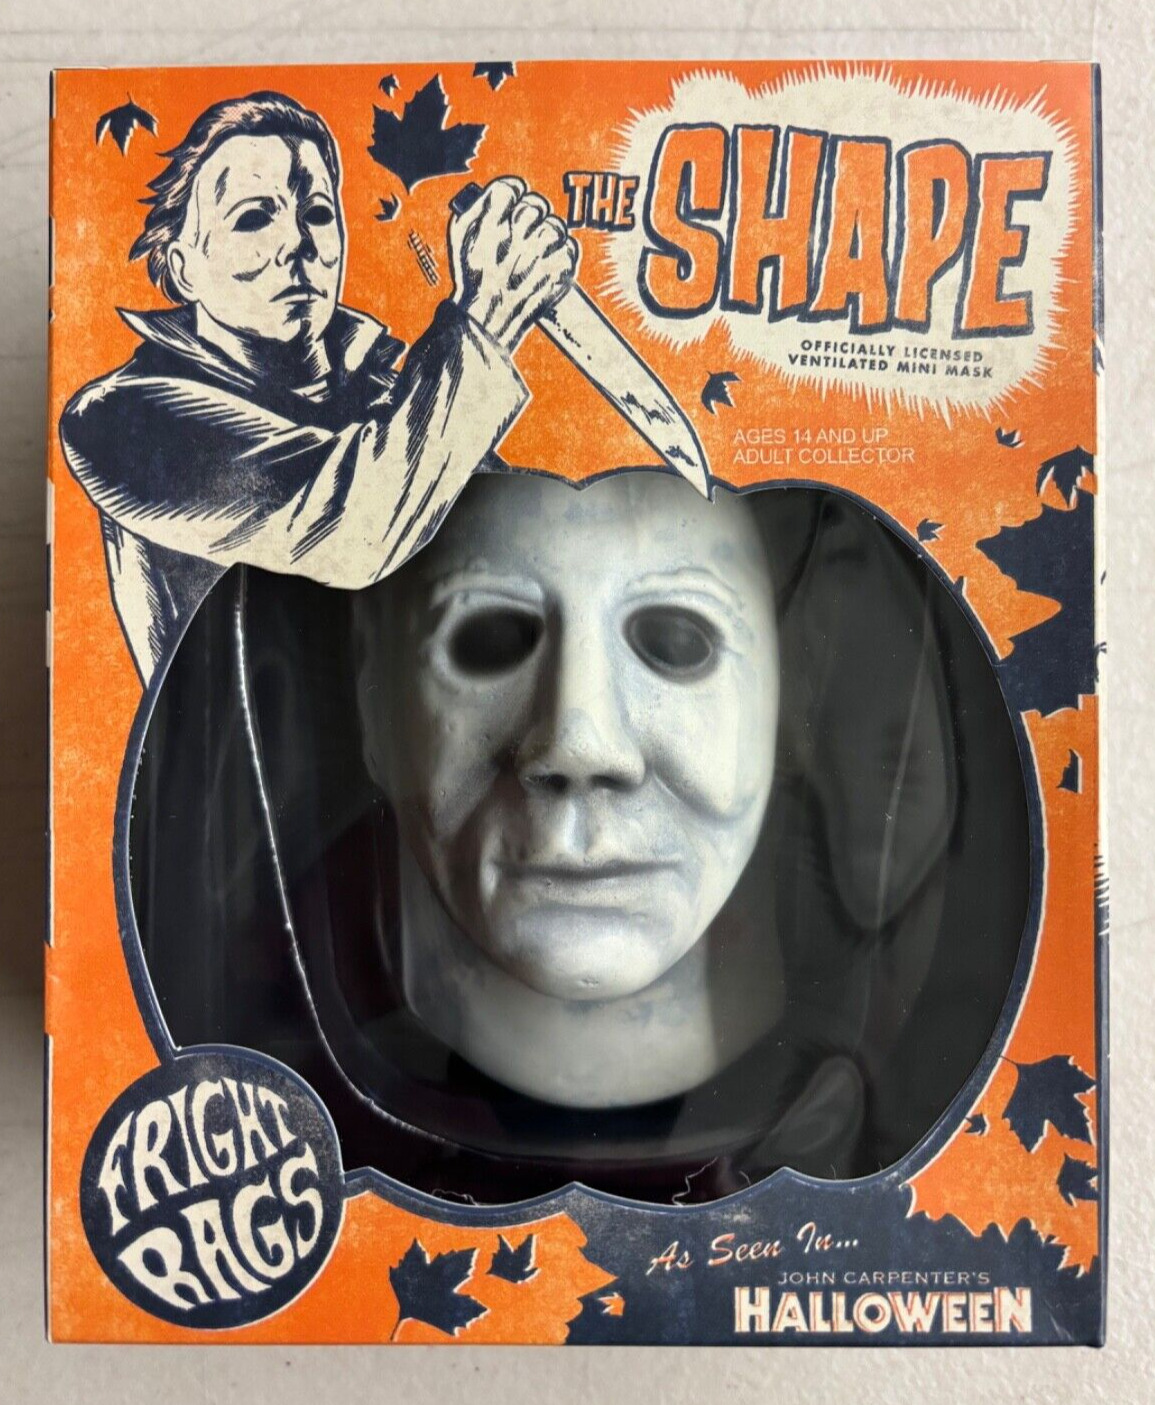 Halloween Michael Myers Mini Mask The Shape by Fright Rags